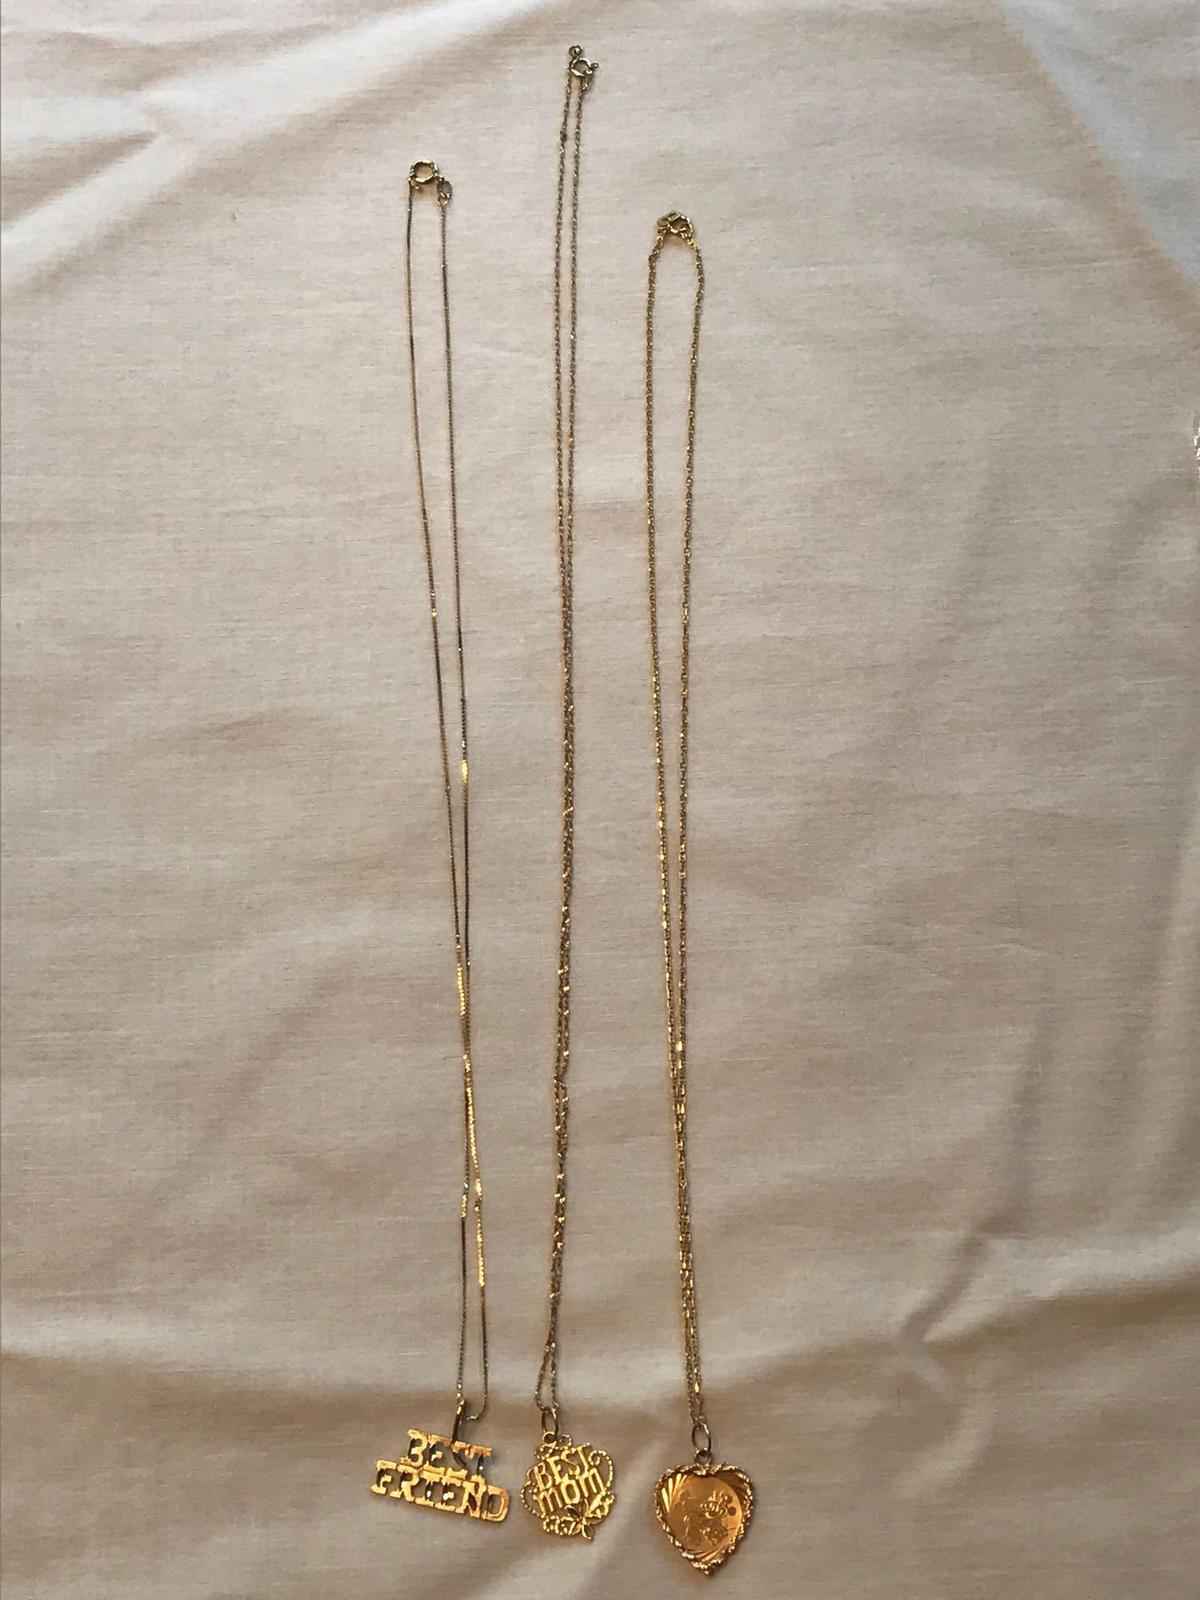 3 14K gold necklaces with 14k gold pendants